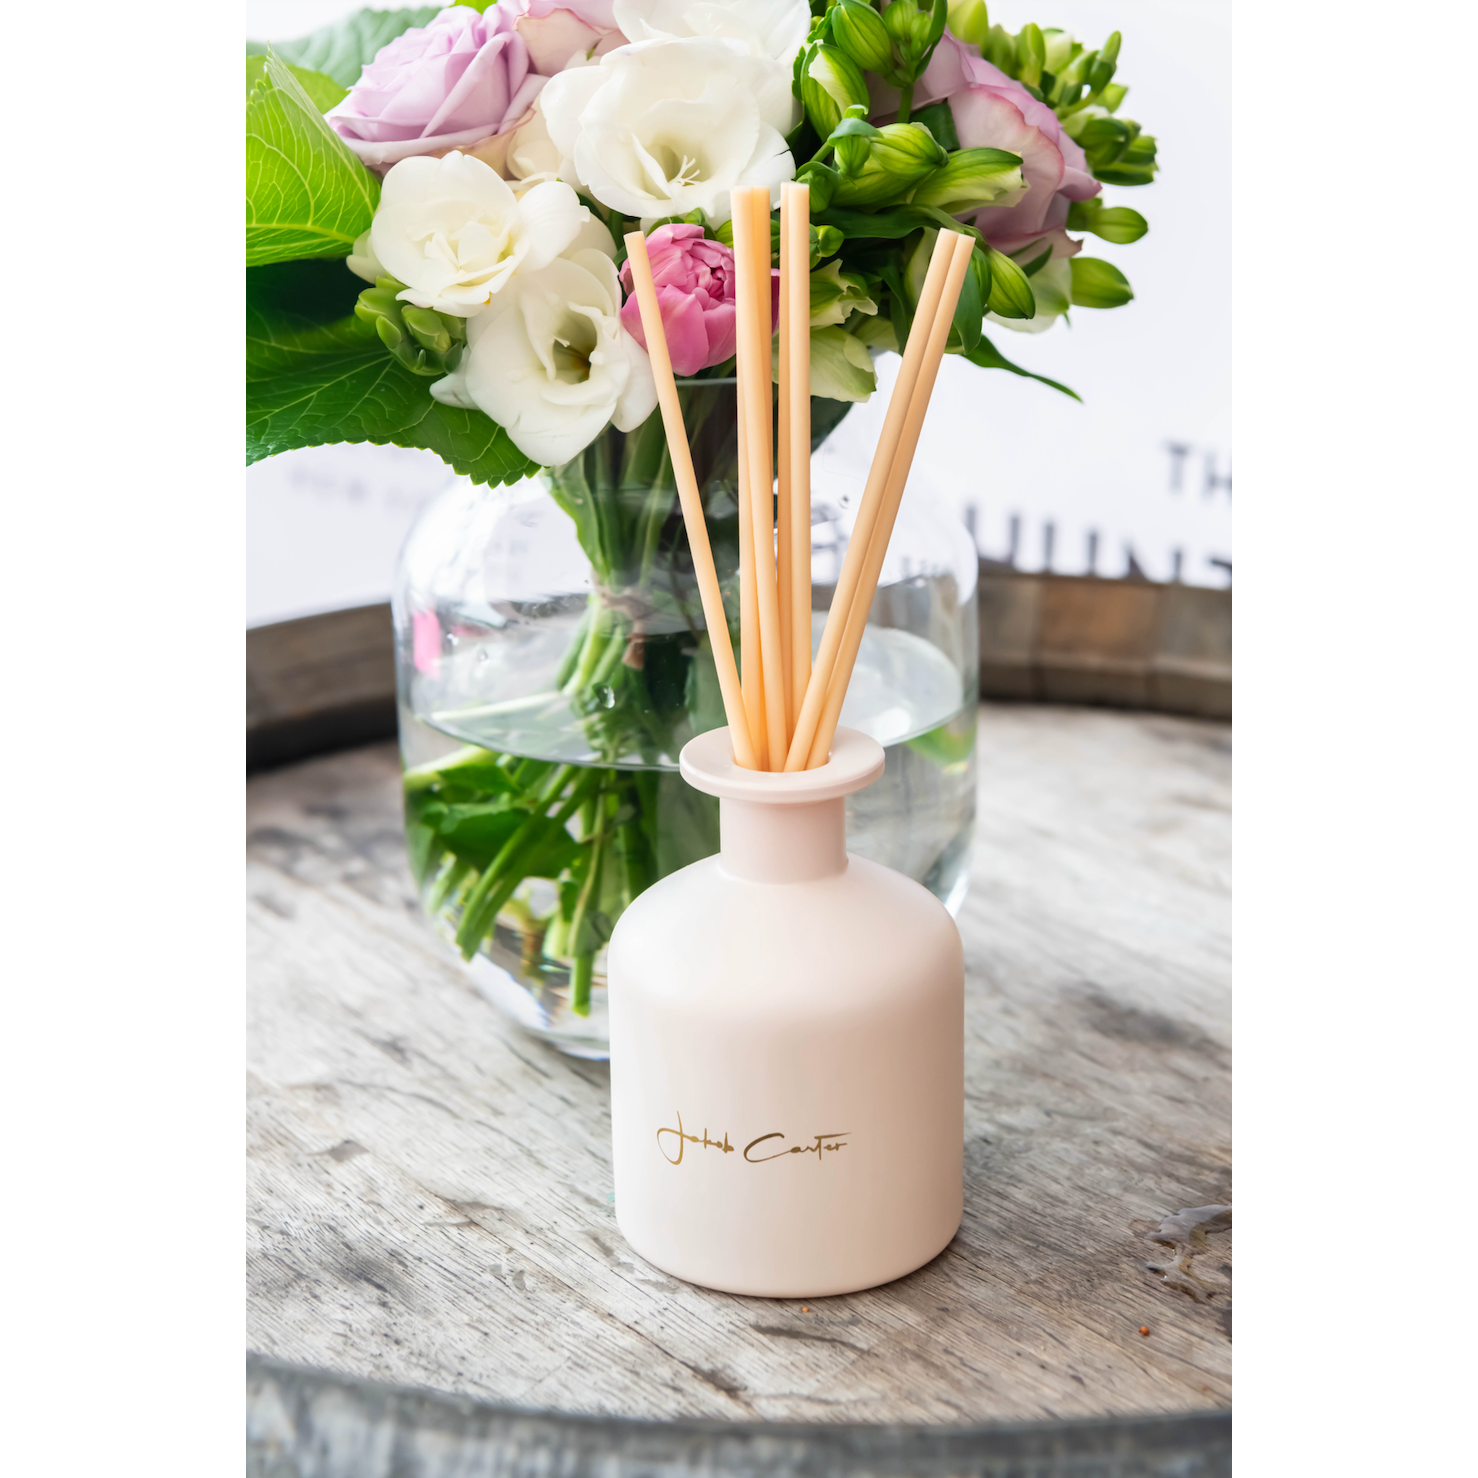 TROPICAL PINA COLADA TRIPLE SCENTED REED DIFFUSER